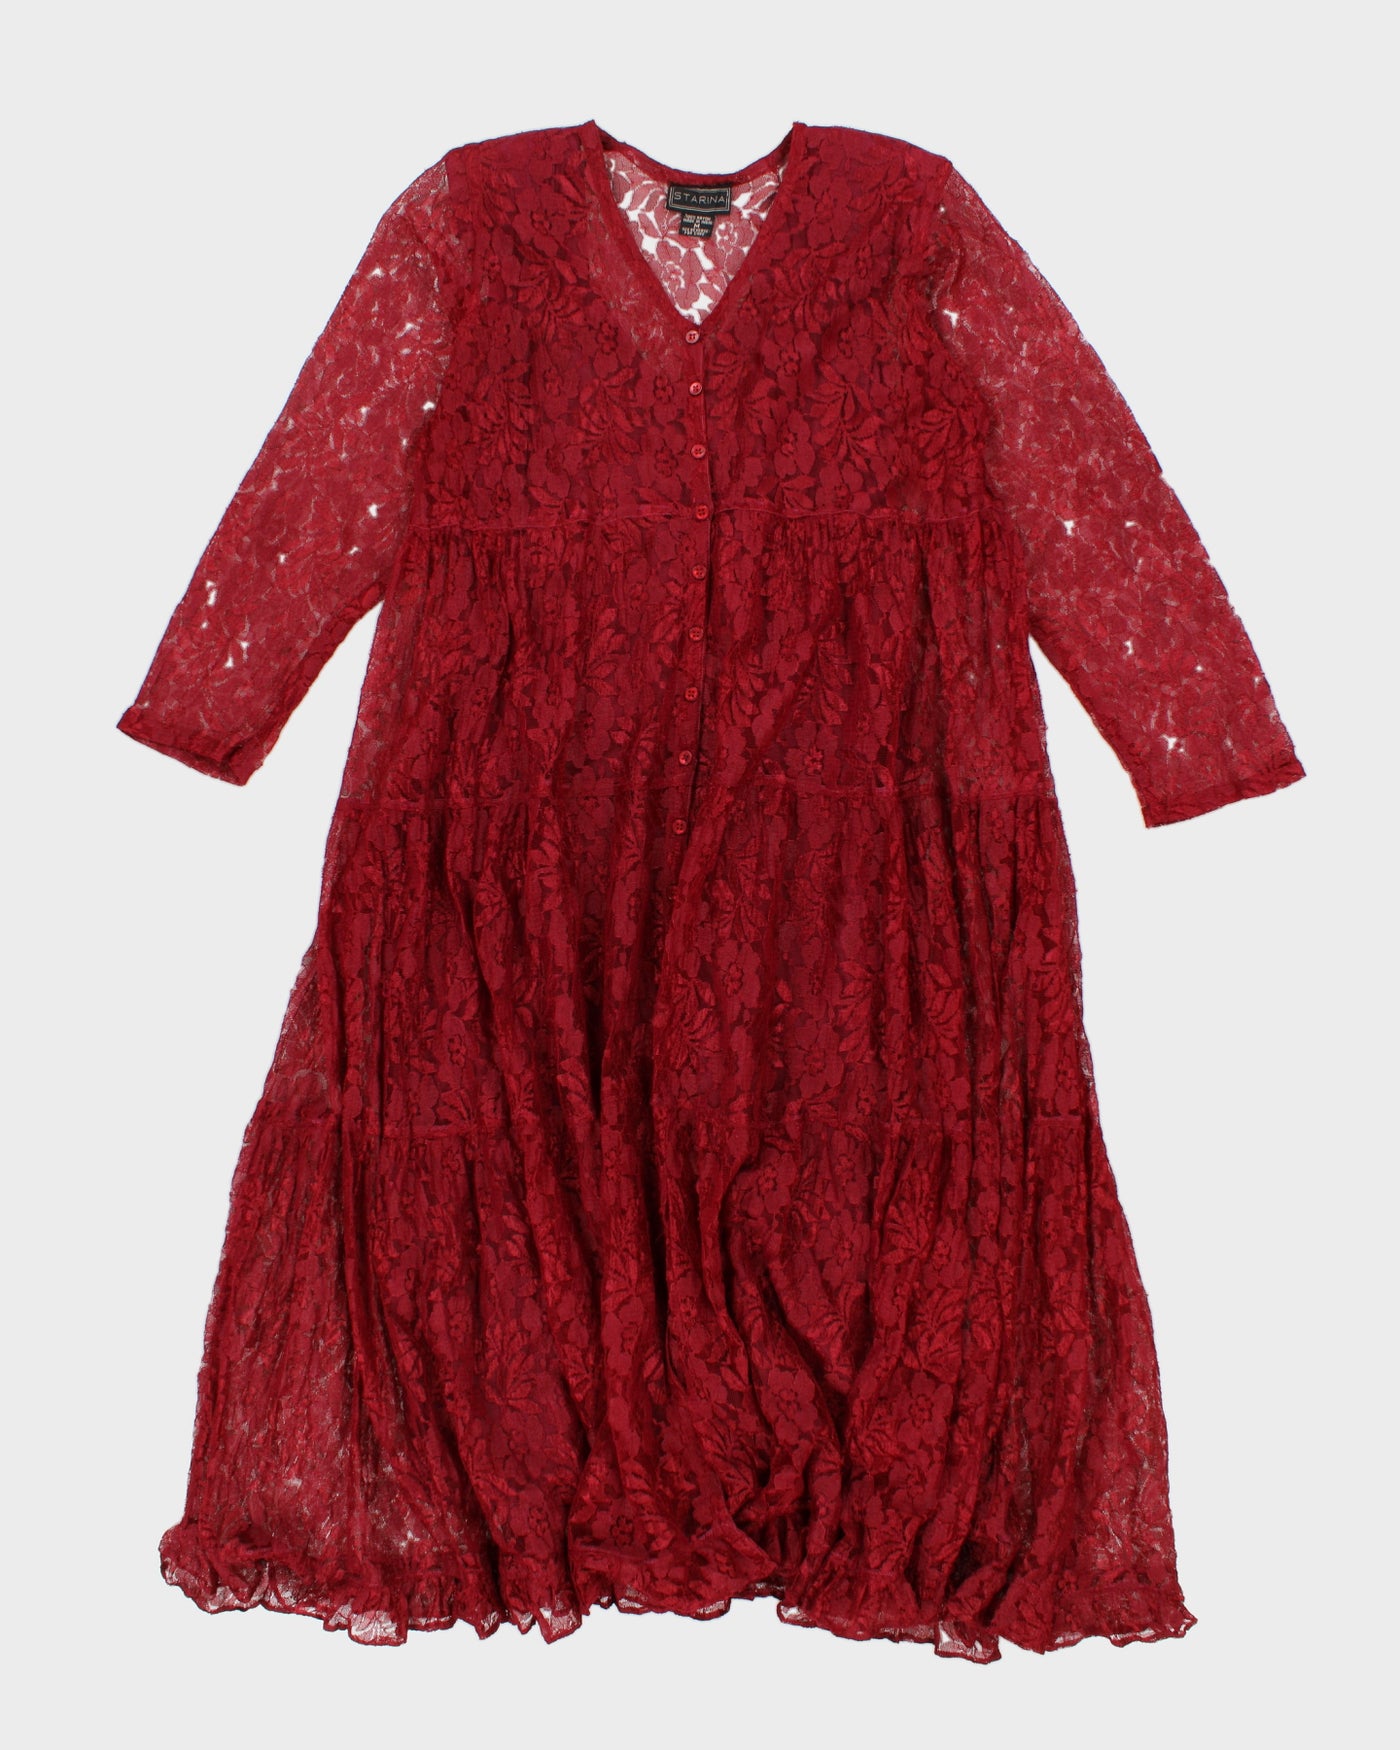 Vintage 90s Starina Red Floral Lace Button-Up Dress - L